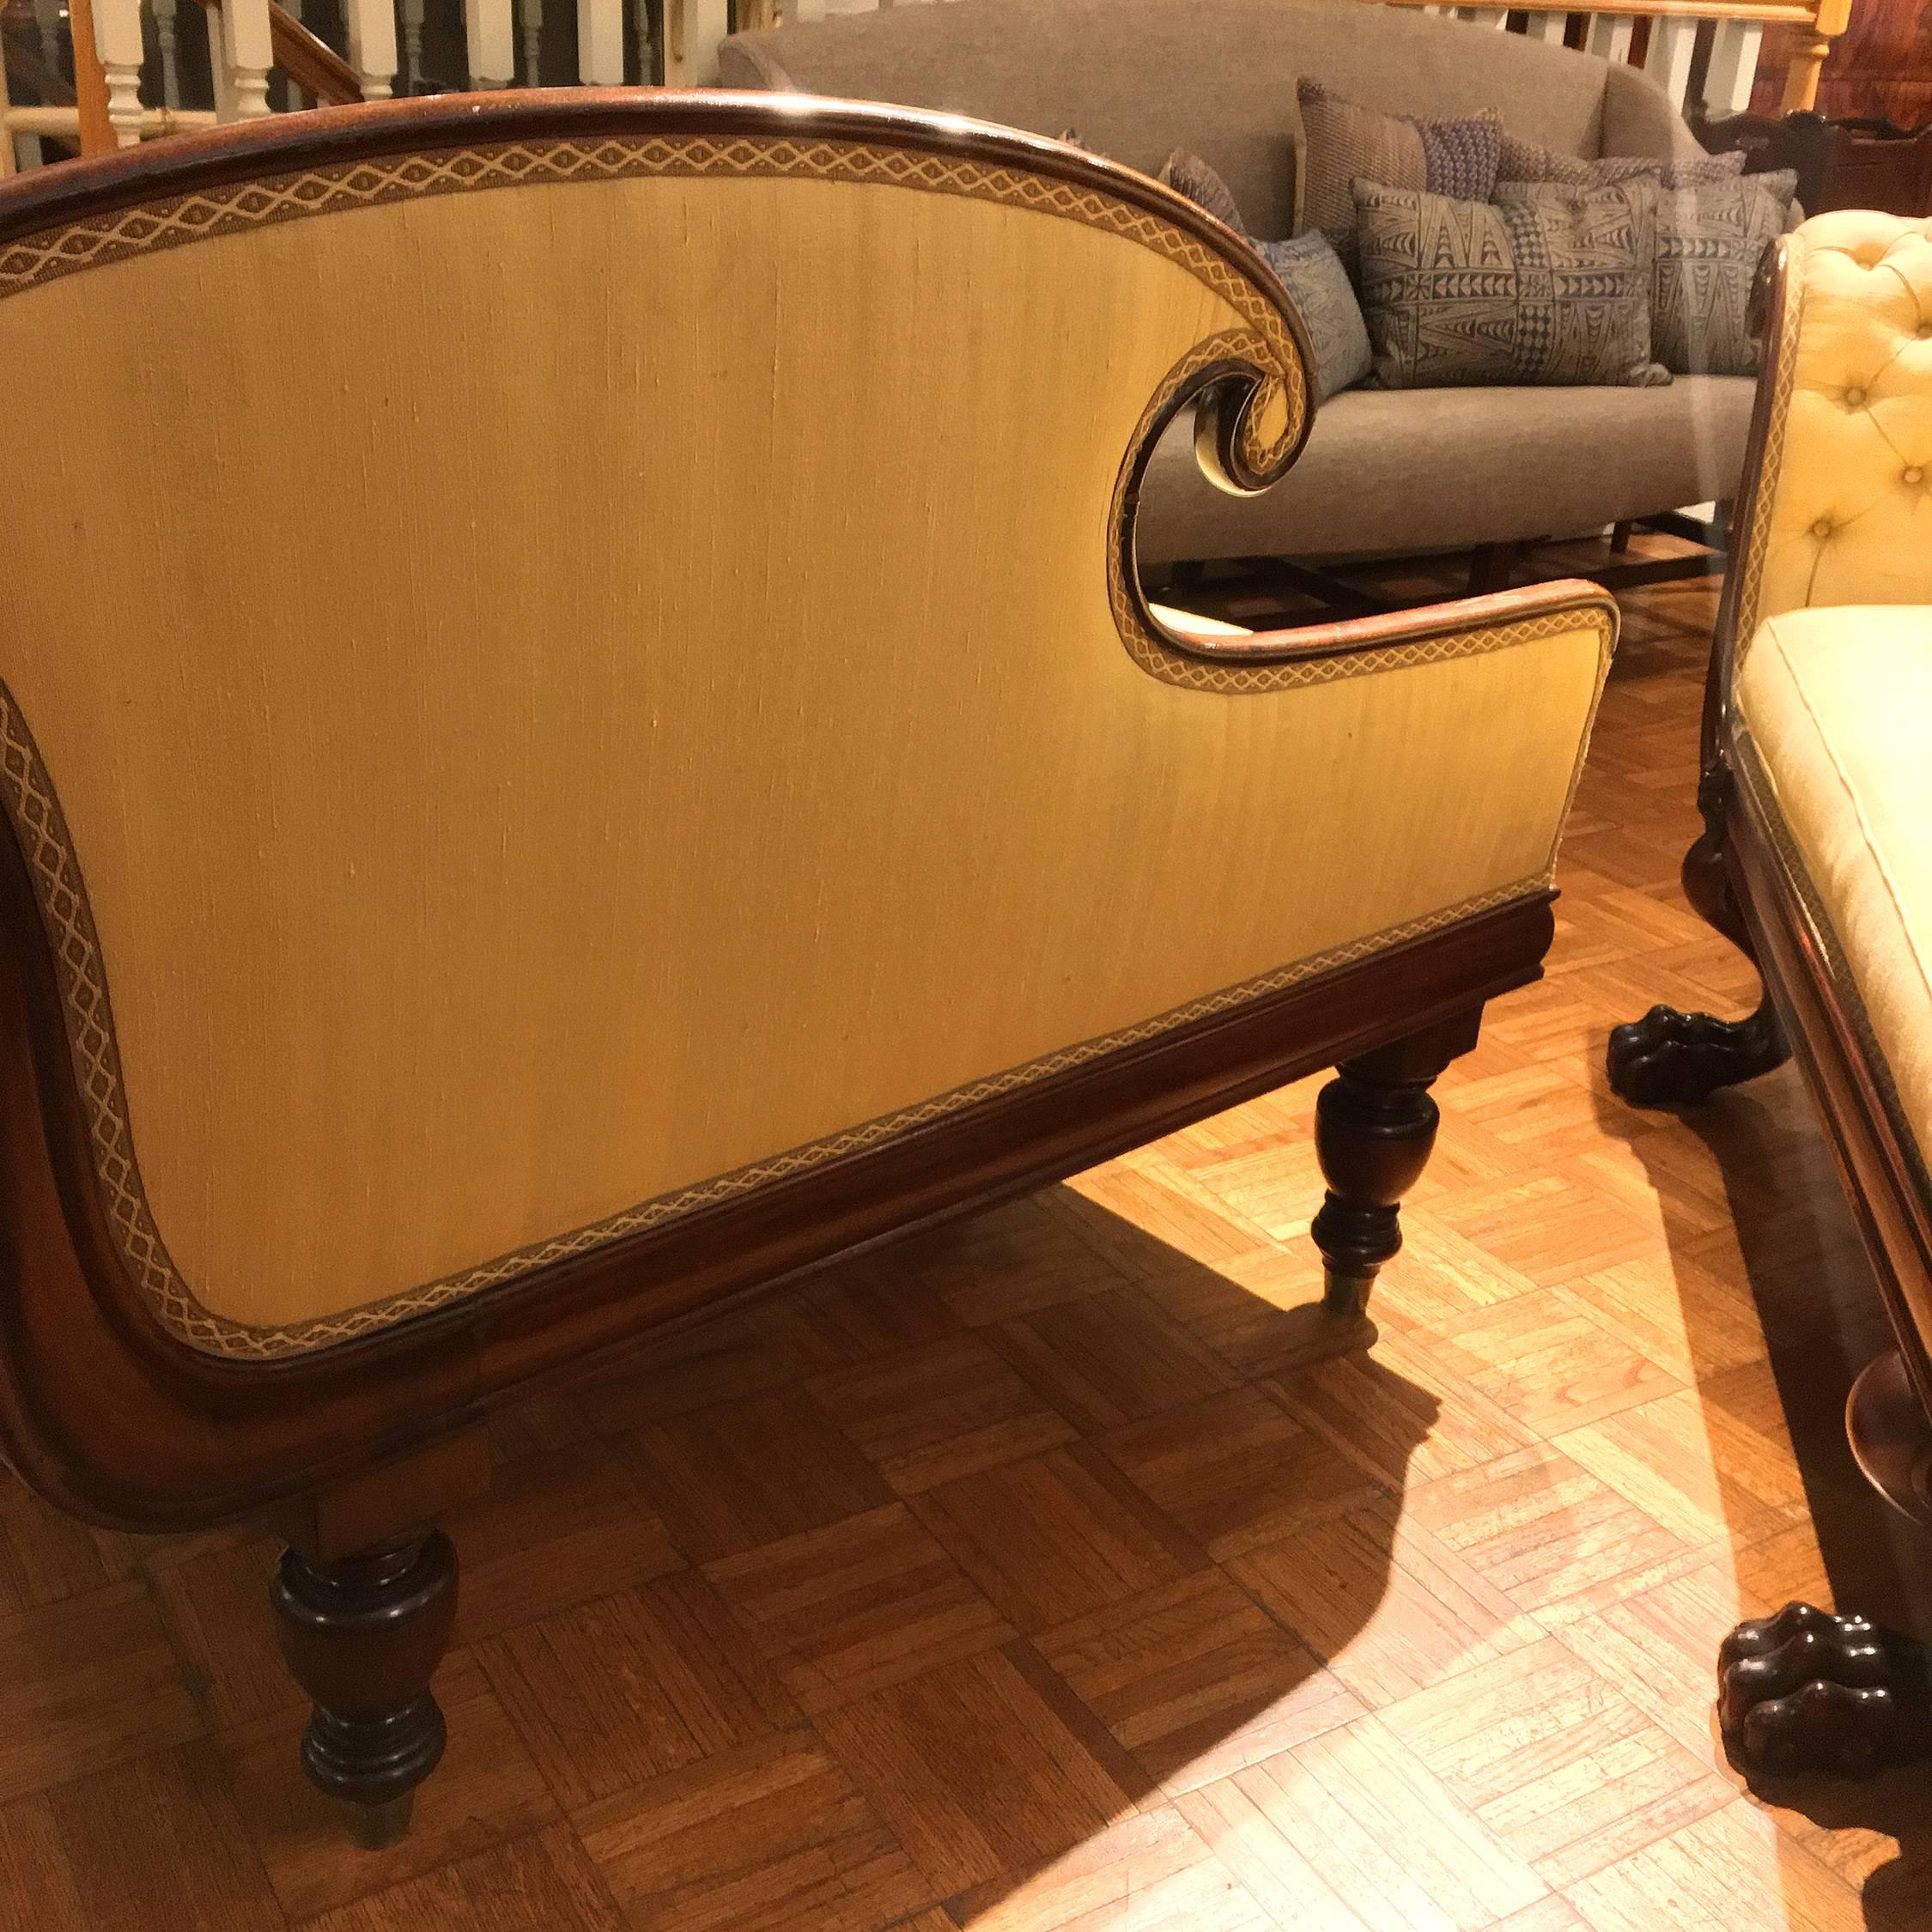 Pair of Diminutive Chaise Lounges in the Méridienne or 